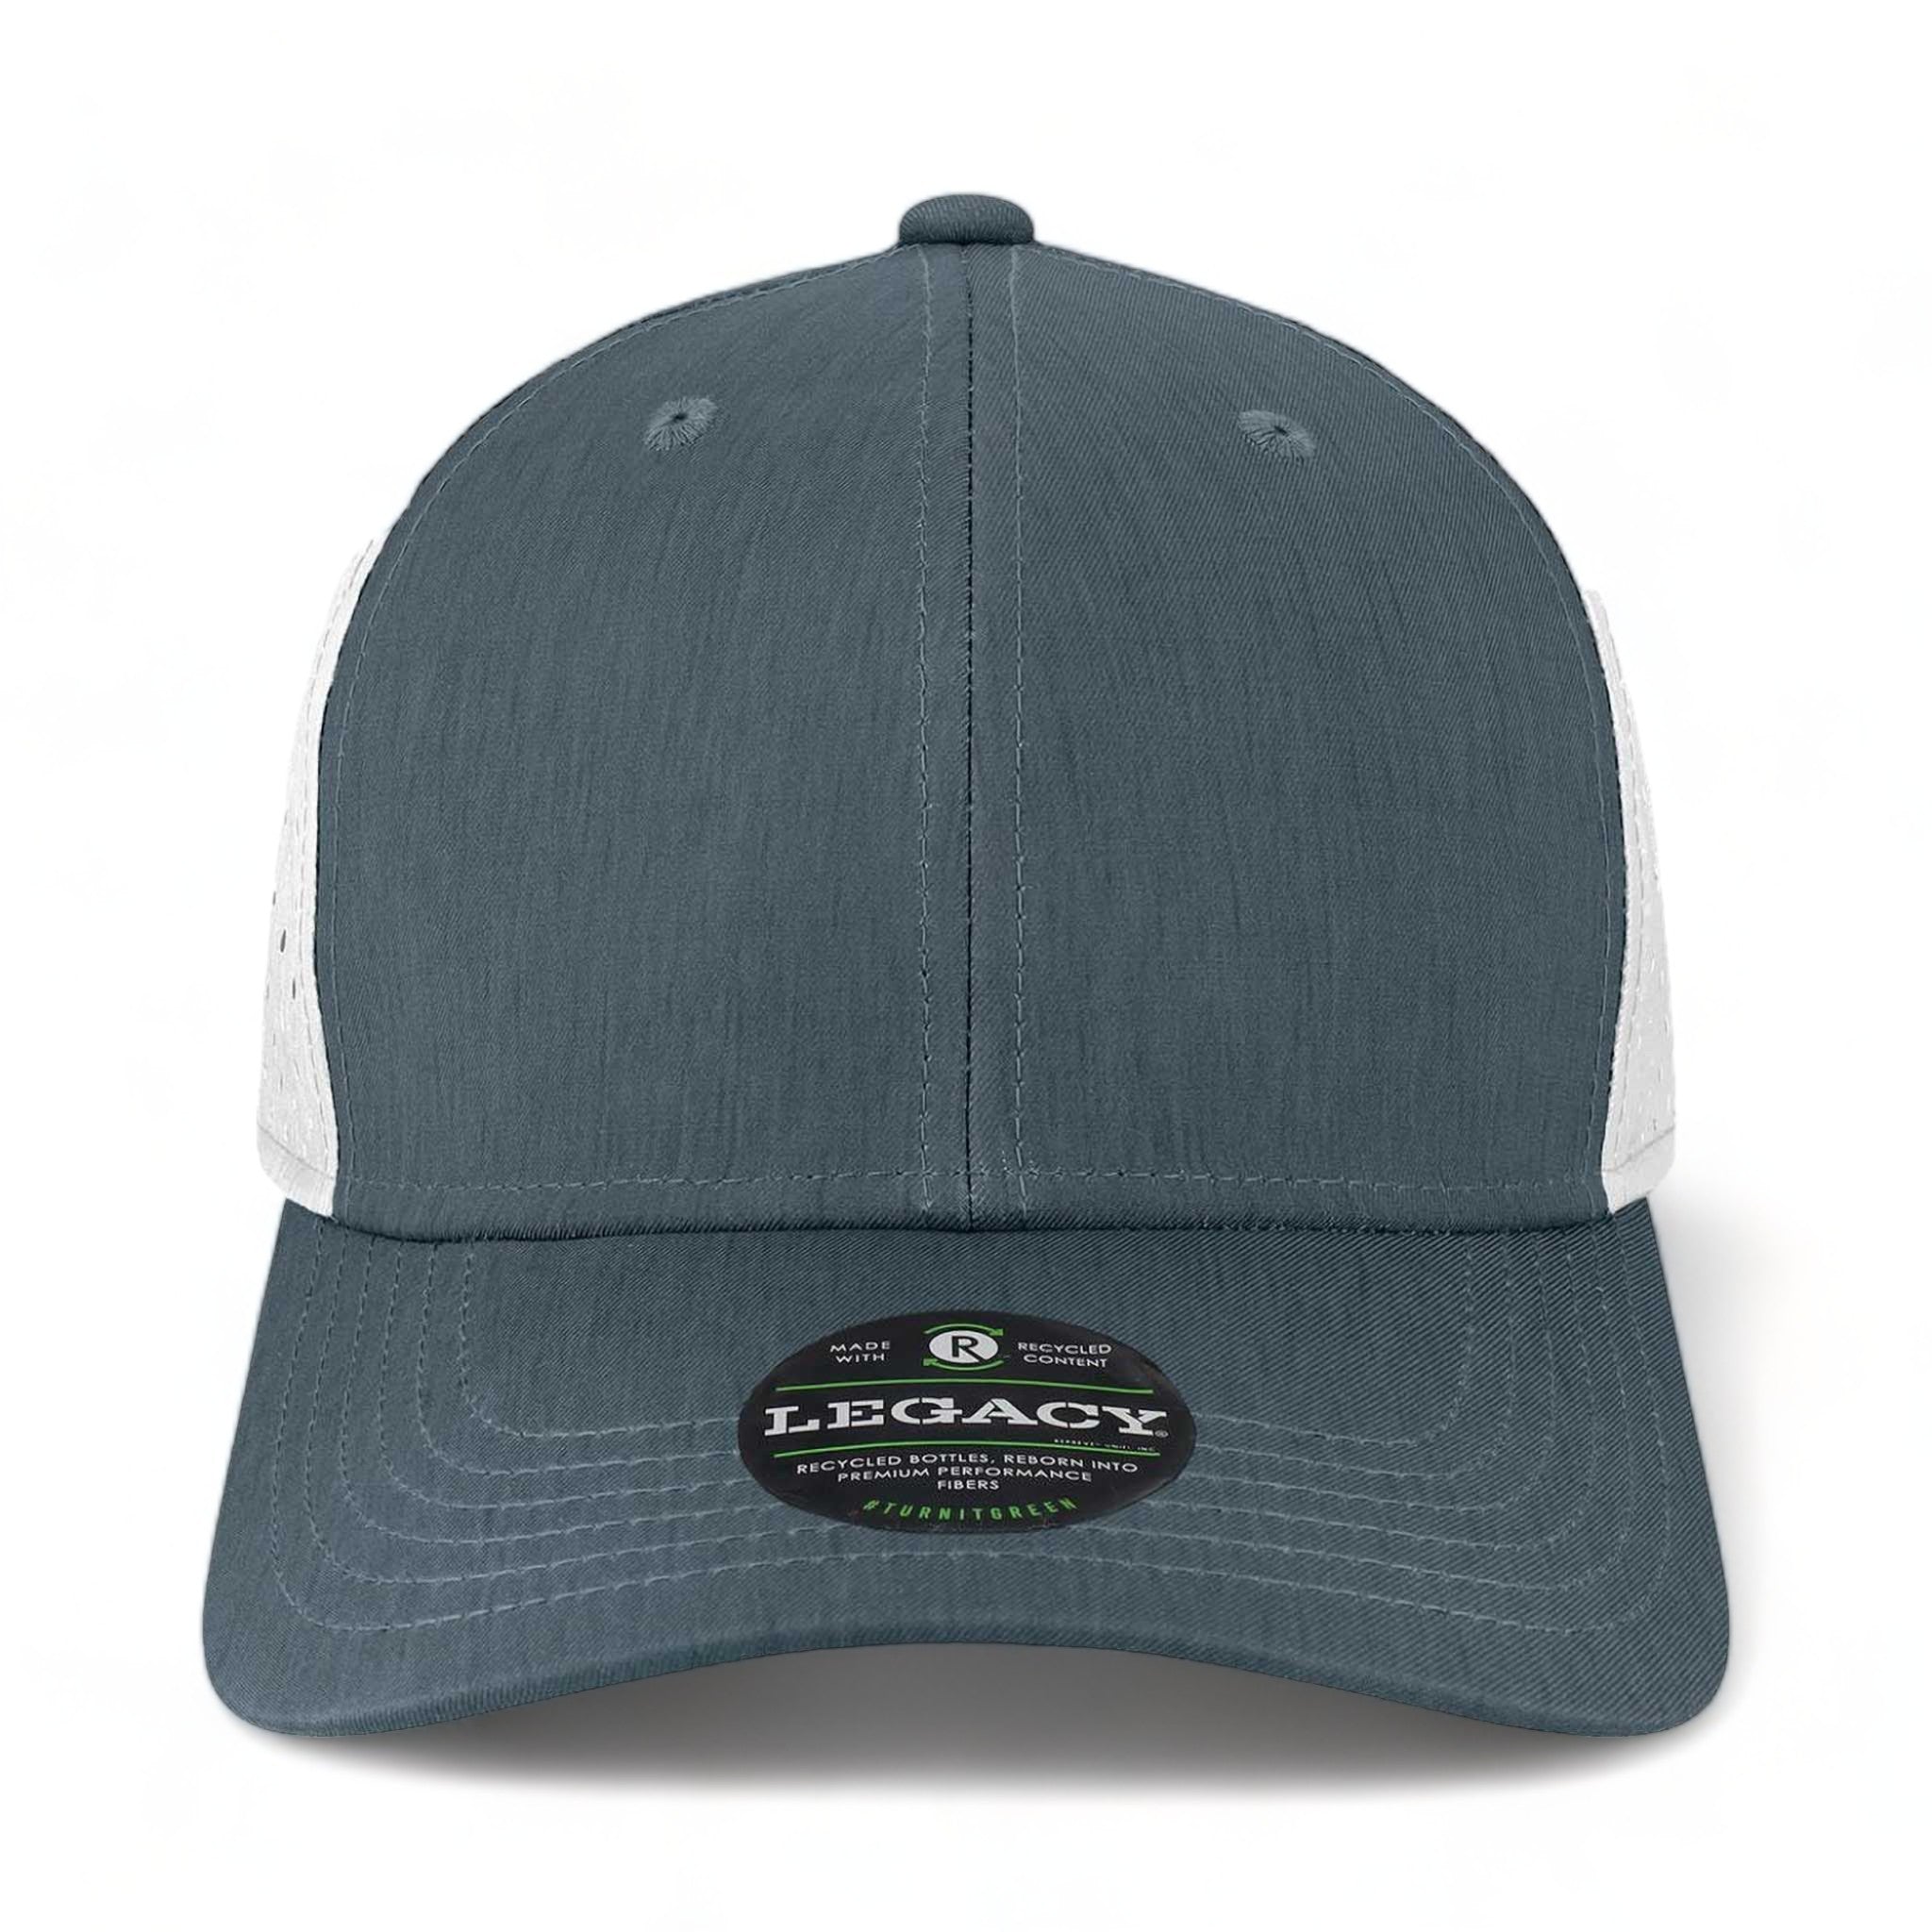 Front view of LEGACY REMPA custom hat in eco navy and white